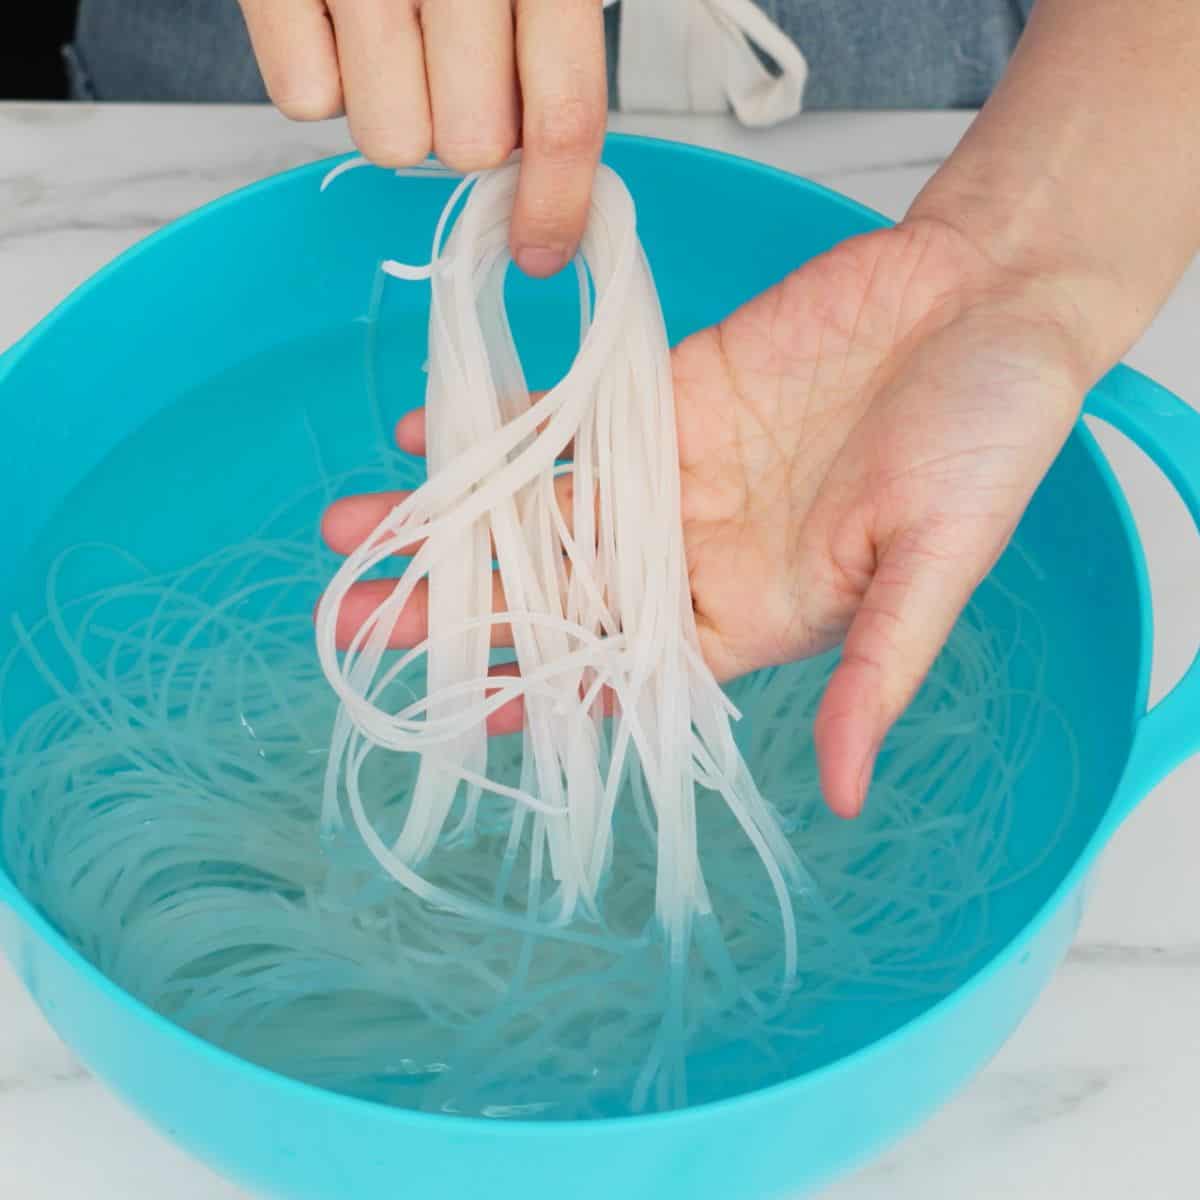 soaked rice noodles being lifted up from a bowl